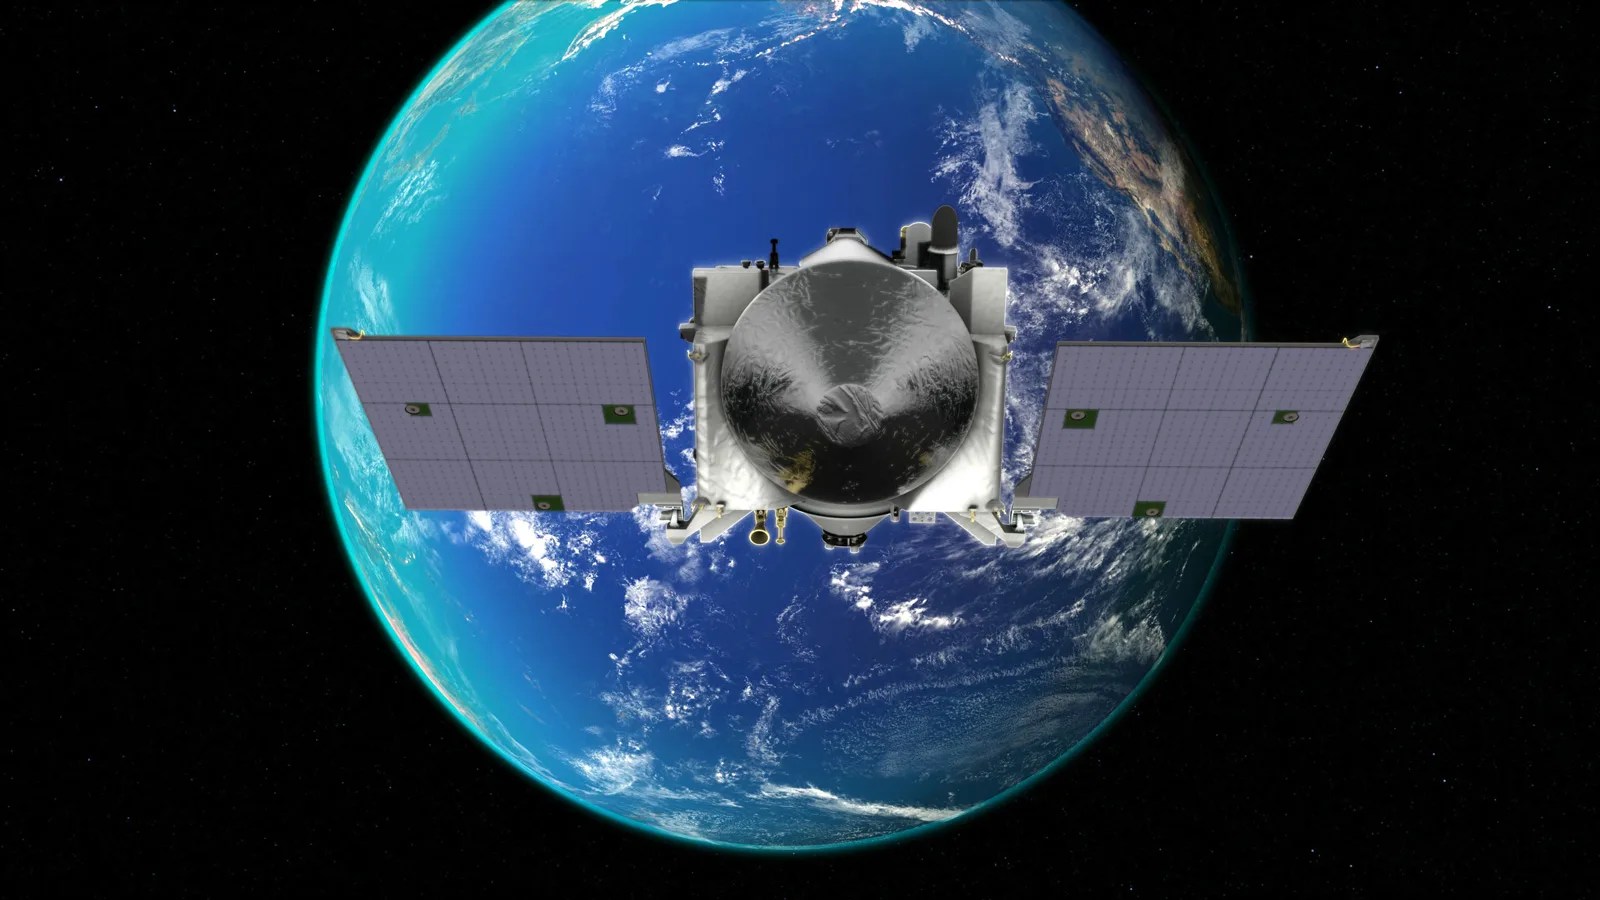 Illustration of spacecraft with Earth in background.